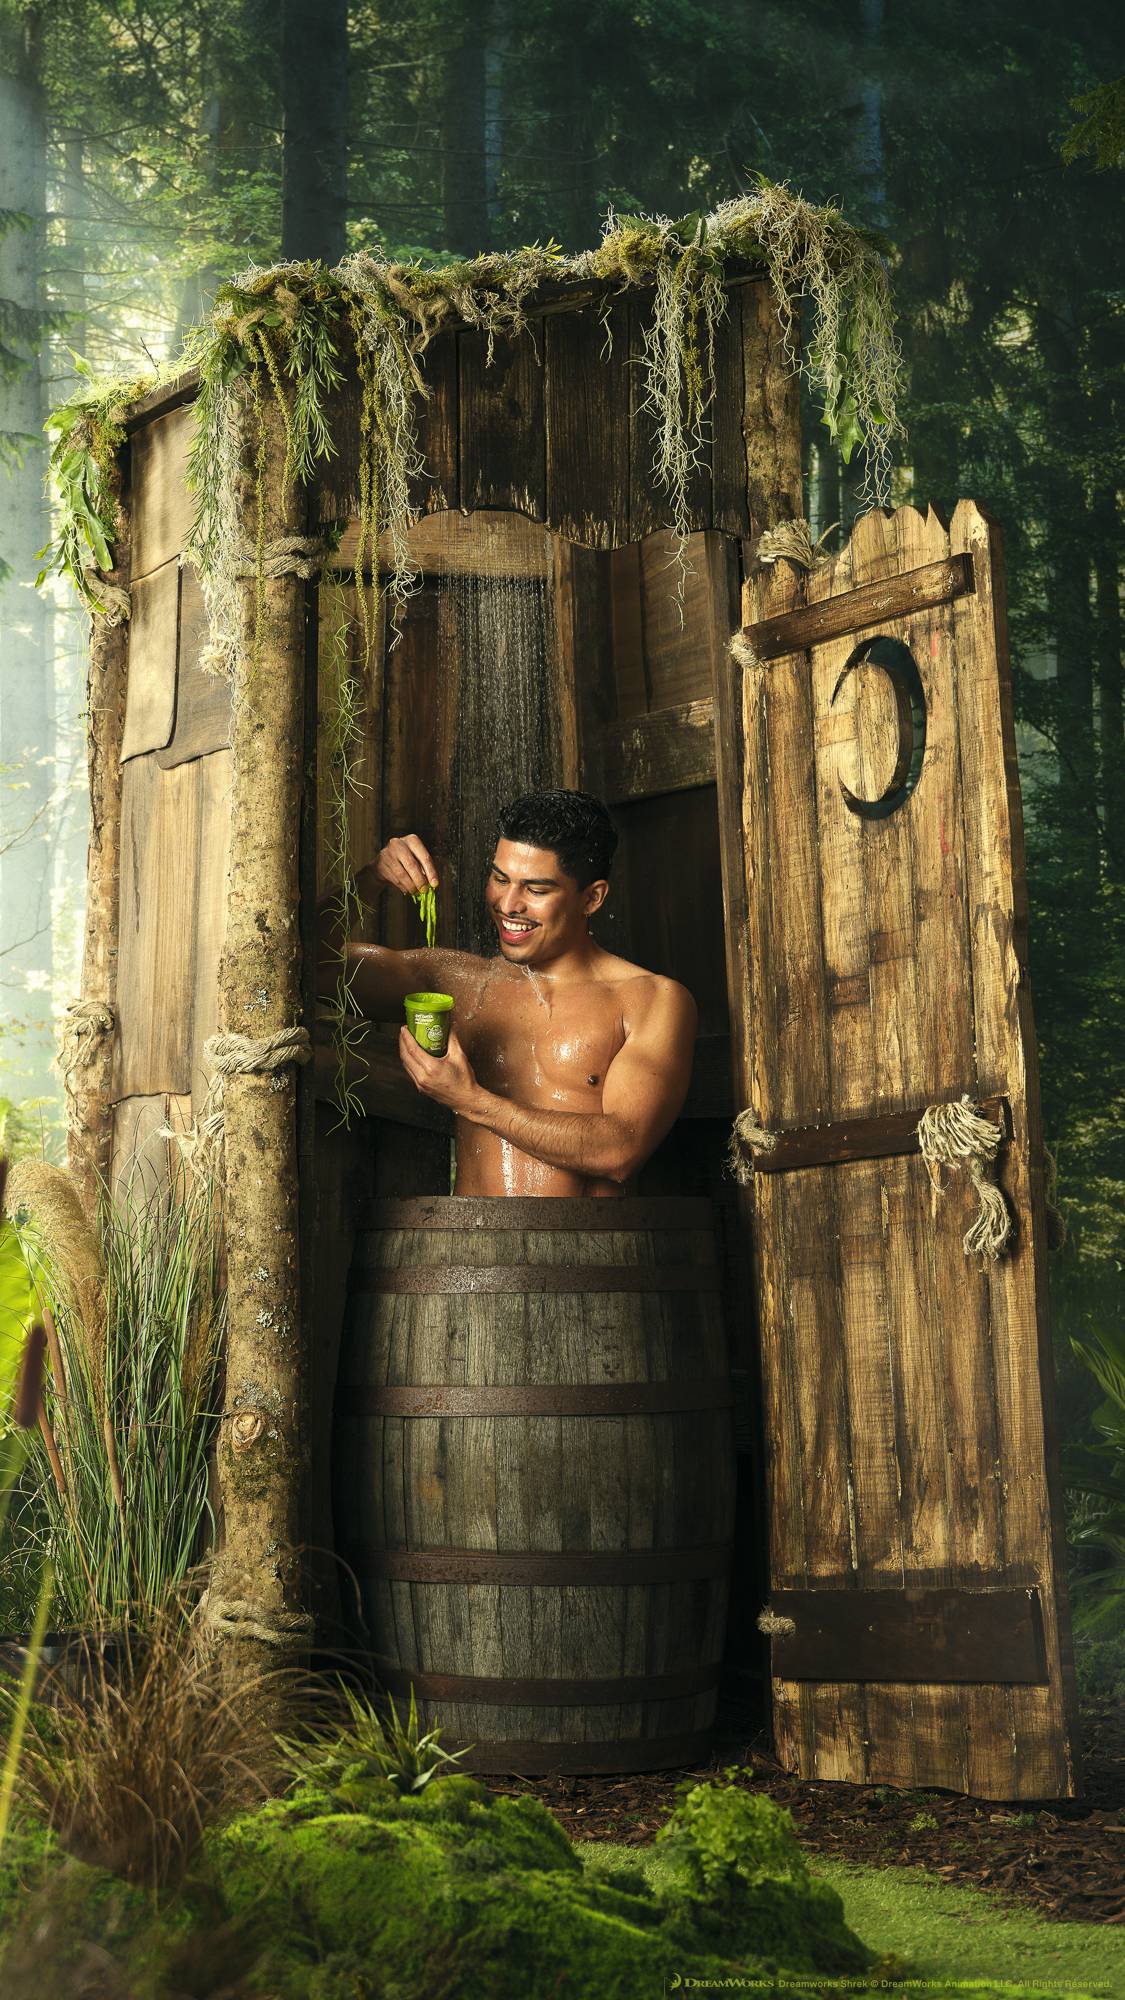 The model is holding the product pot while showering in a wooden barrel inside the iconic wonky, wooden outhouse from the Shrek films. It is surrounded by forest trees and moss. 